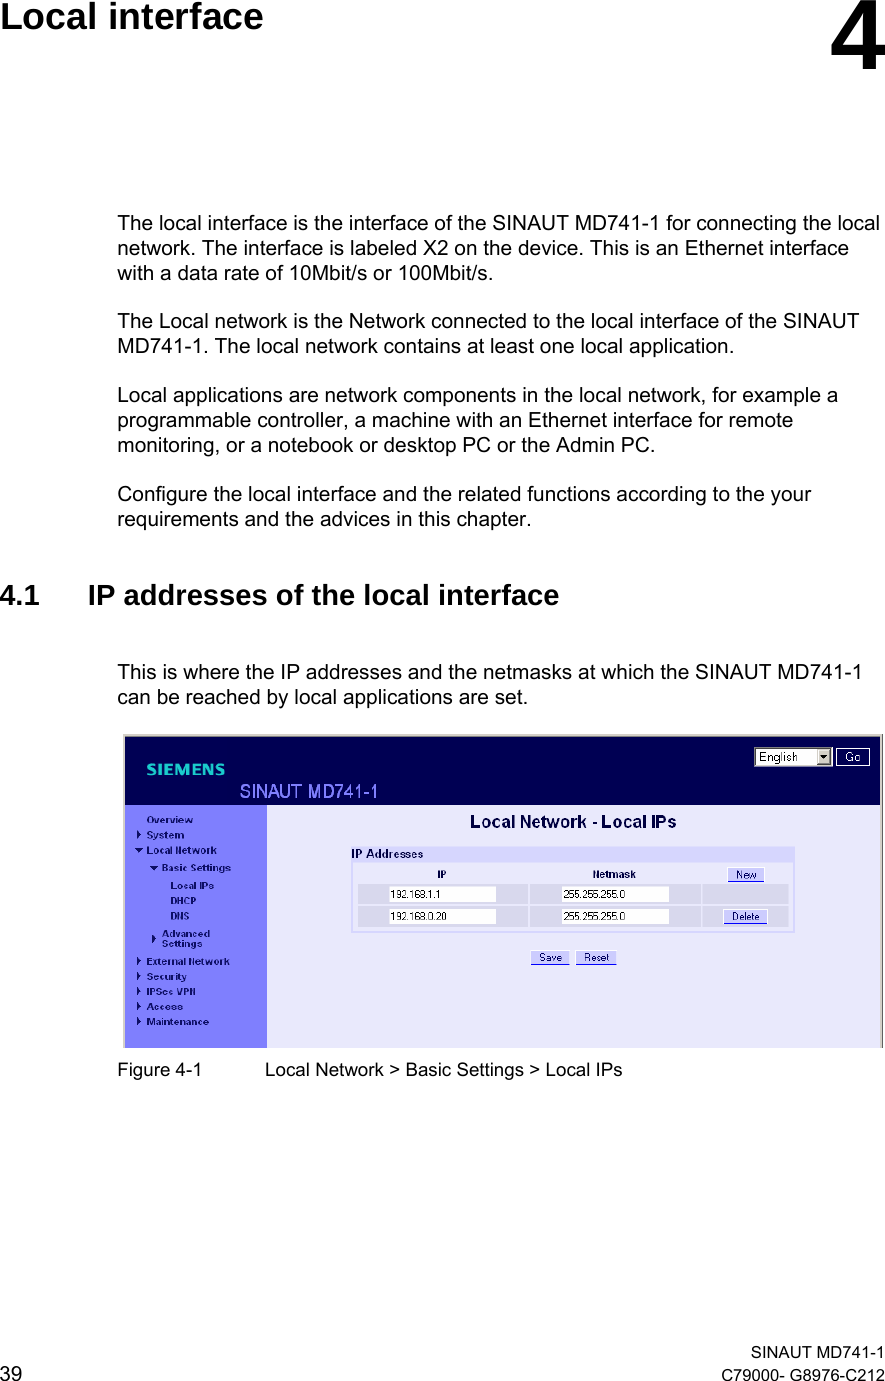   SINAUT MD741-1 39  C79000- G8976-C212    Local interface  4 The local interface is the interface of the SINAUT MD741-1 for connecting the local network. The interface is labeled X2 on the device. This is an Ethernet interface with a data rate of 10Mbit/s or 100Mbit/s. The Local network is the Network connected to the local interface of the SINAUT MD741-1. The local network contains at least one local application. Local applications are network components in the local network, for example a programmable controller, a machine with an Ethernet interface for remote monitoring, or a notebook or desktop PC or the Admin PC. Configure the local interface and the related functions according to the your requirements and the advices in this chapter.   4.1  IP addresses of the local interface This is where the IP addresses and the netmasks at which the SINAUT MD741-1 can be reached by local applications are set.     Figure 4-1  Local Network &gt; Basic Settings &gt; Local IPs    